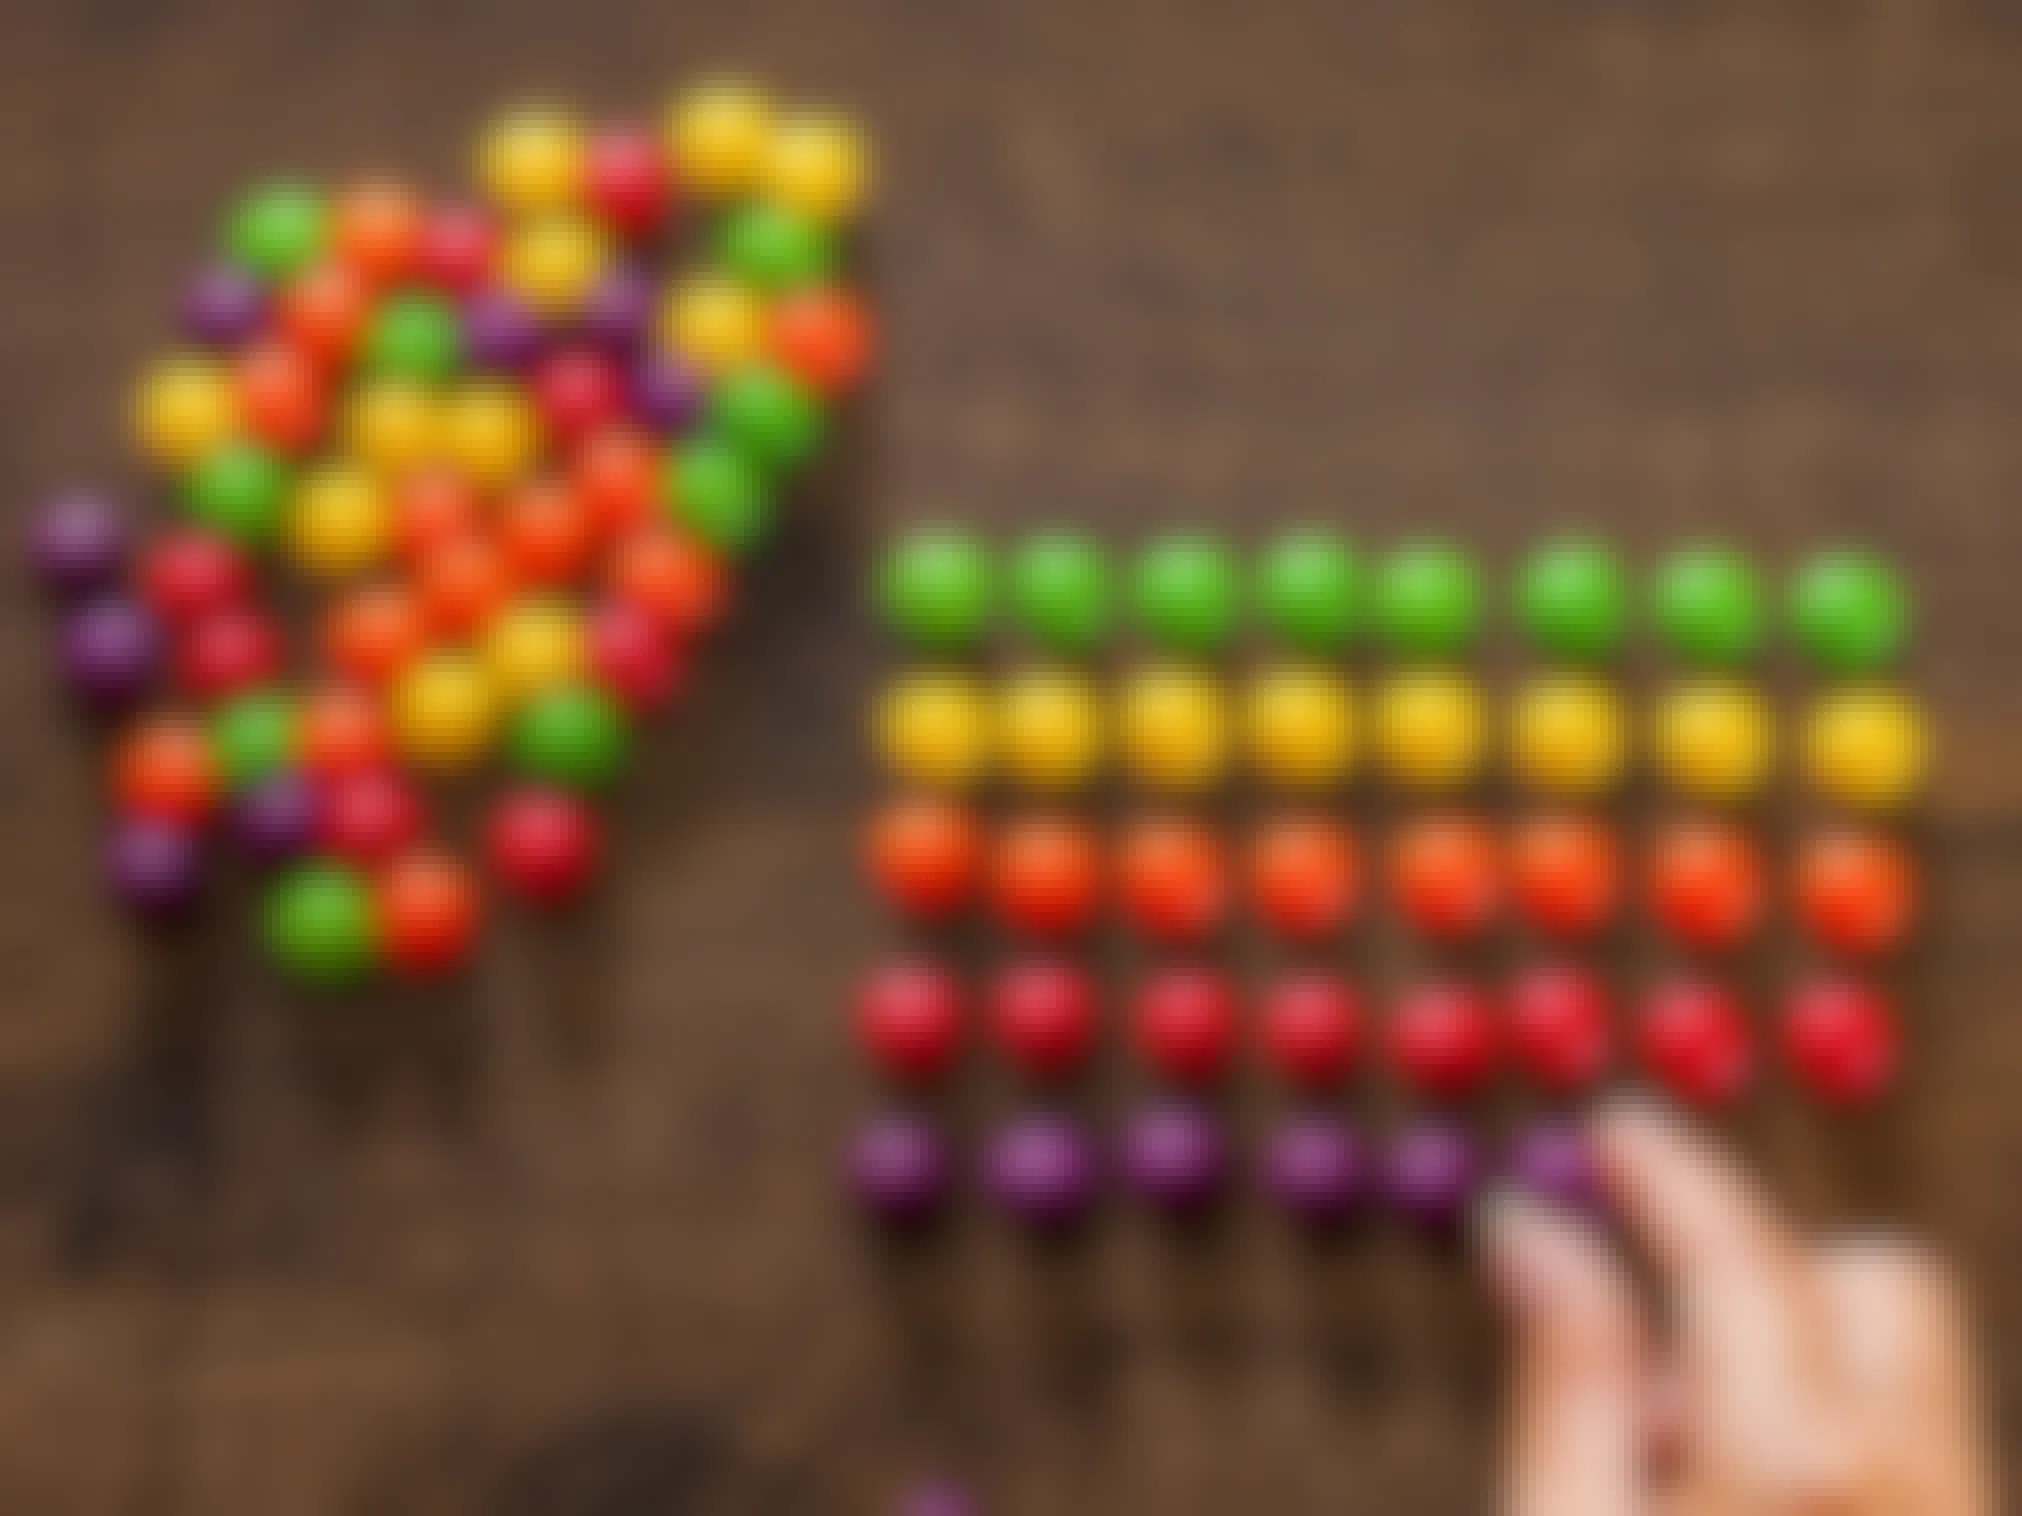 A person sorting skittles by color